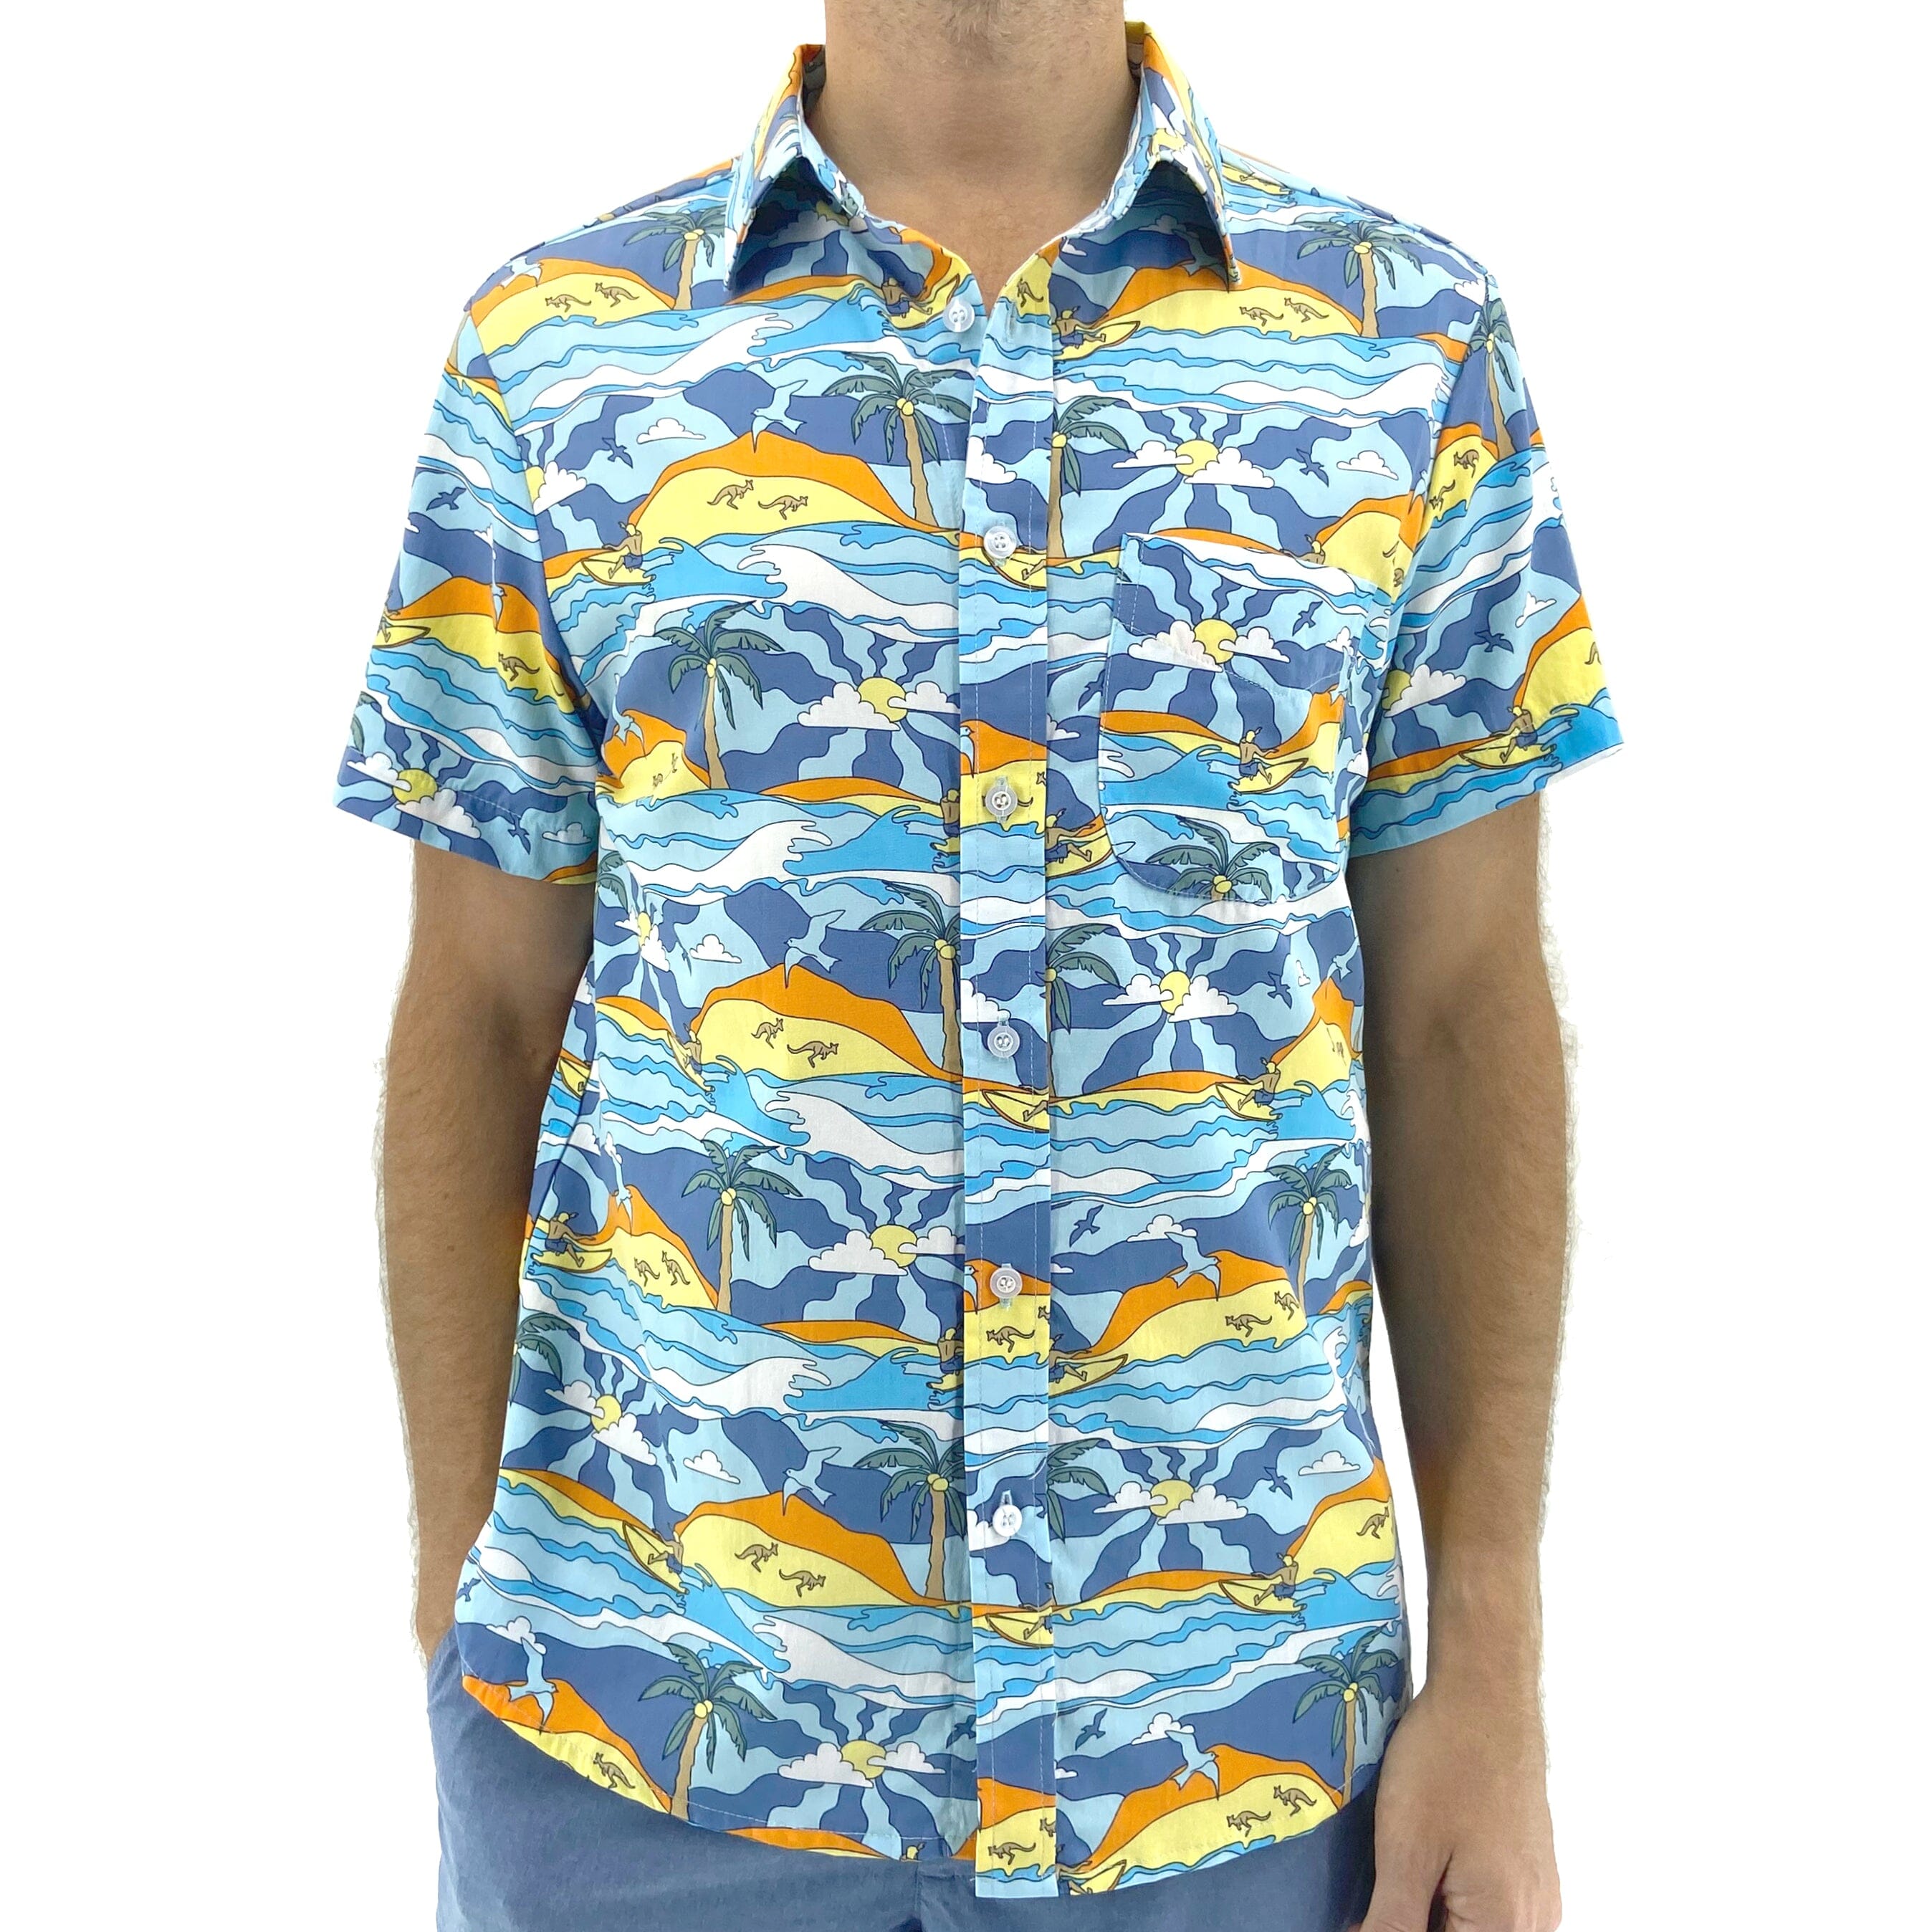 Men's 60's Inspired Trippy Surfer Patterned Button Down Hawaiian Shirt